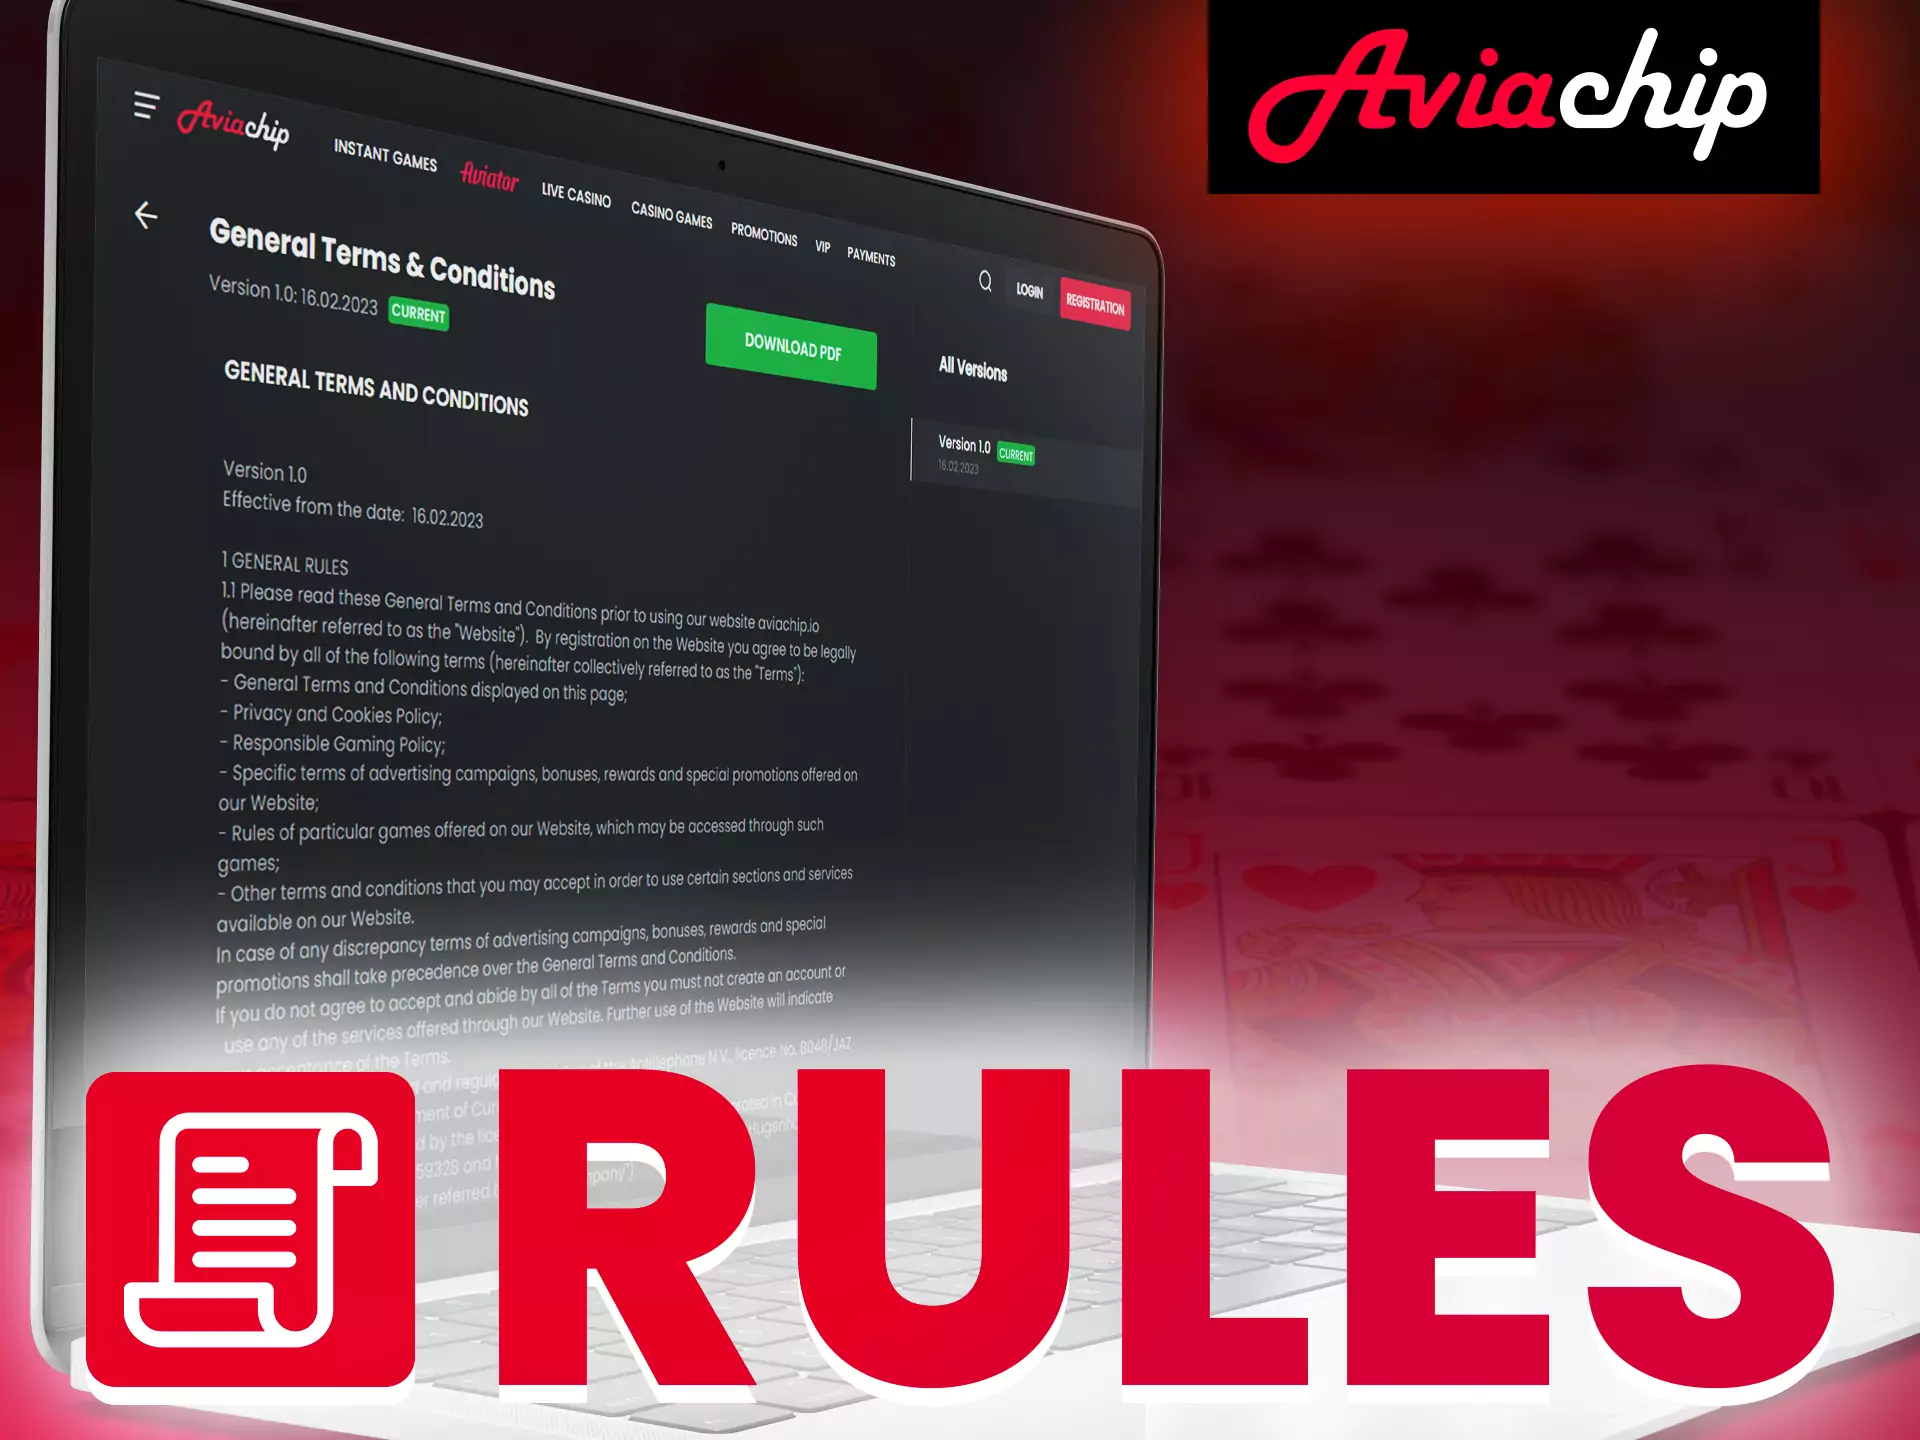 Get to know the simple rules of Aviachip to bet and play in the casino.